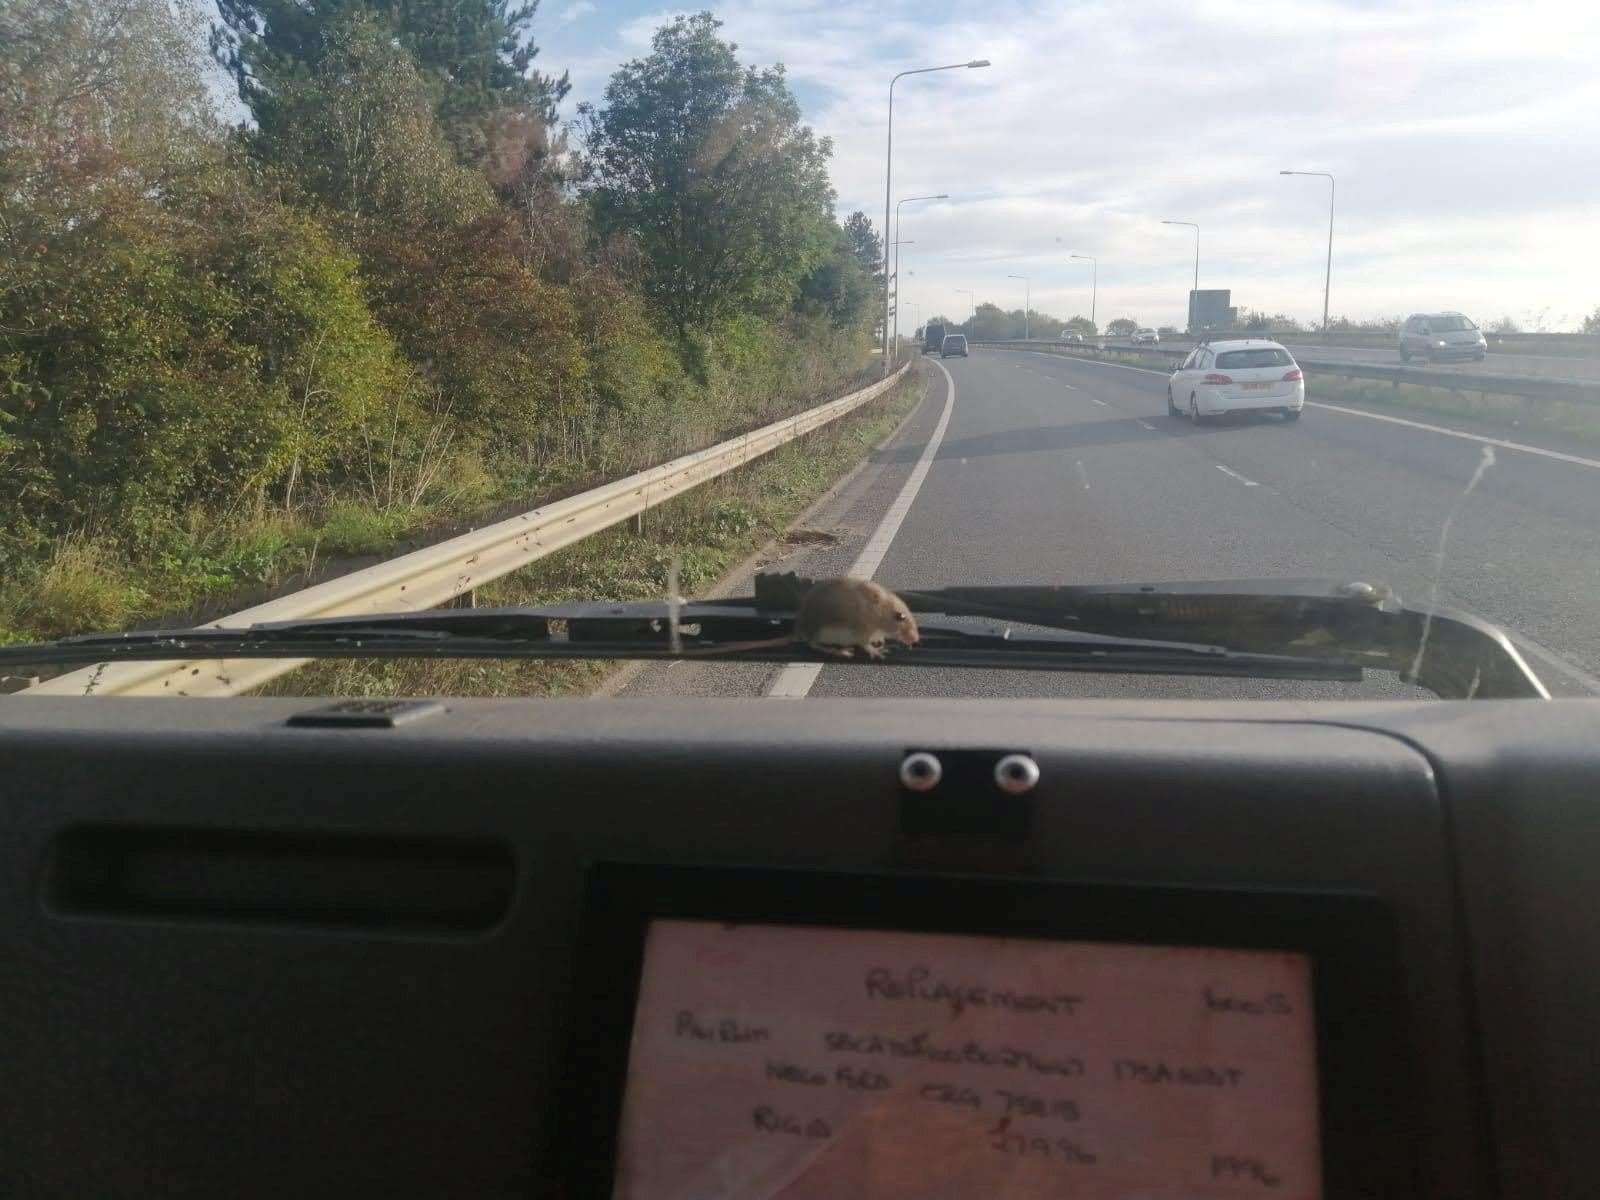 The mouse was safely recovered at the next stop. Photo: SWNS